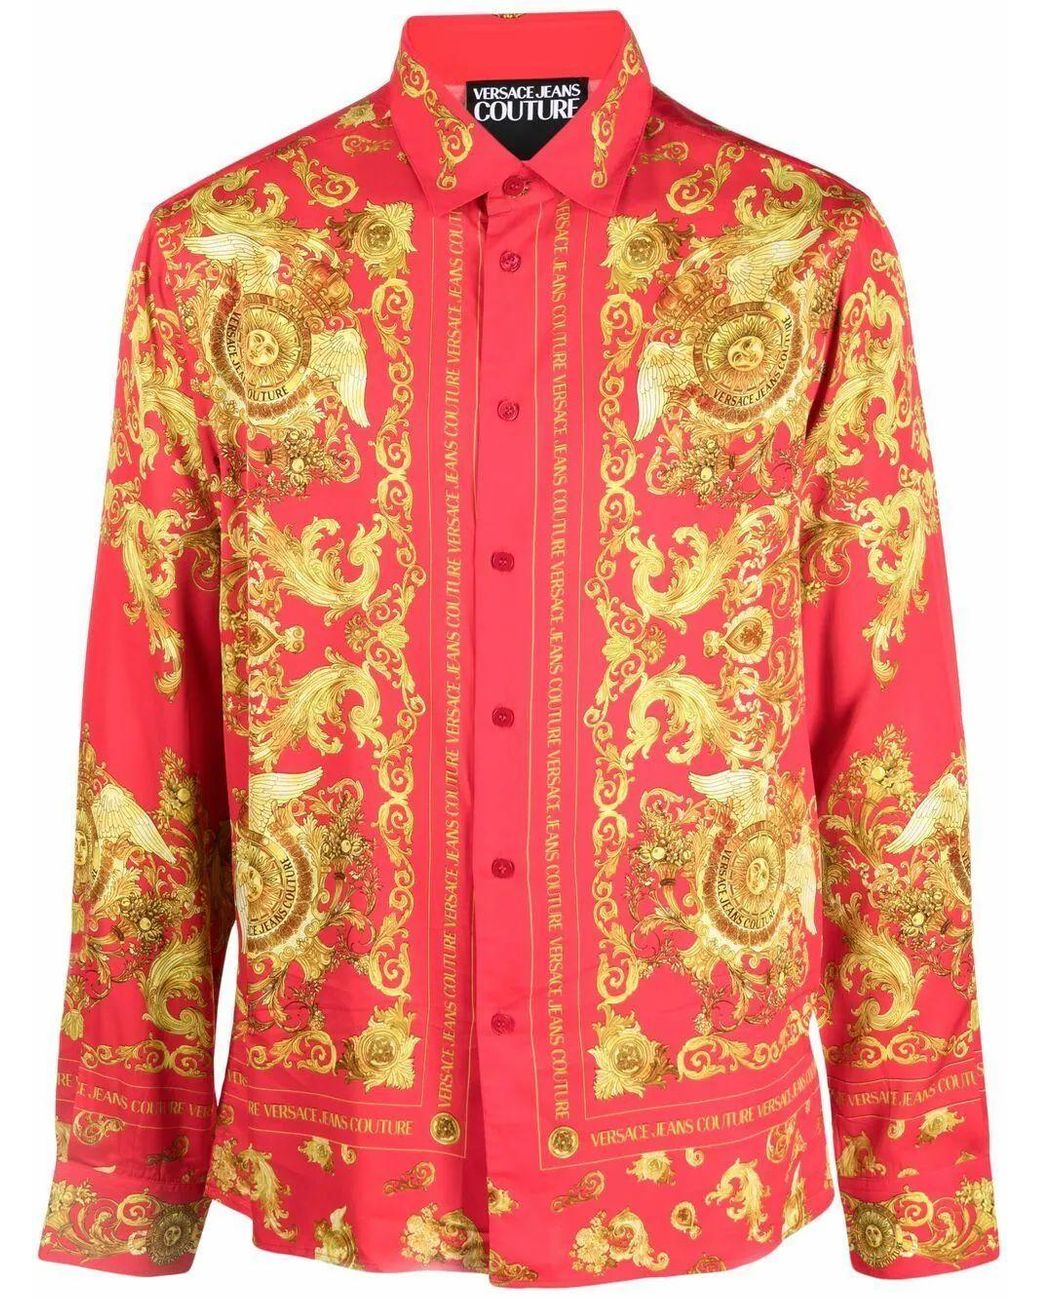 Versace Jeans Couture Denim Shirt in Red for Men - Lyst